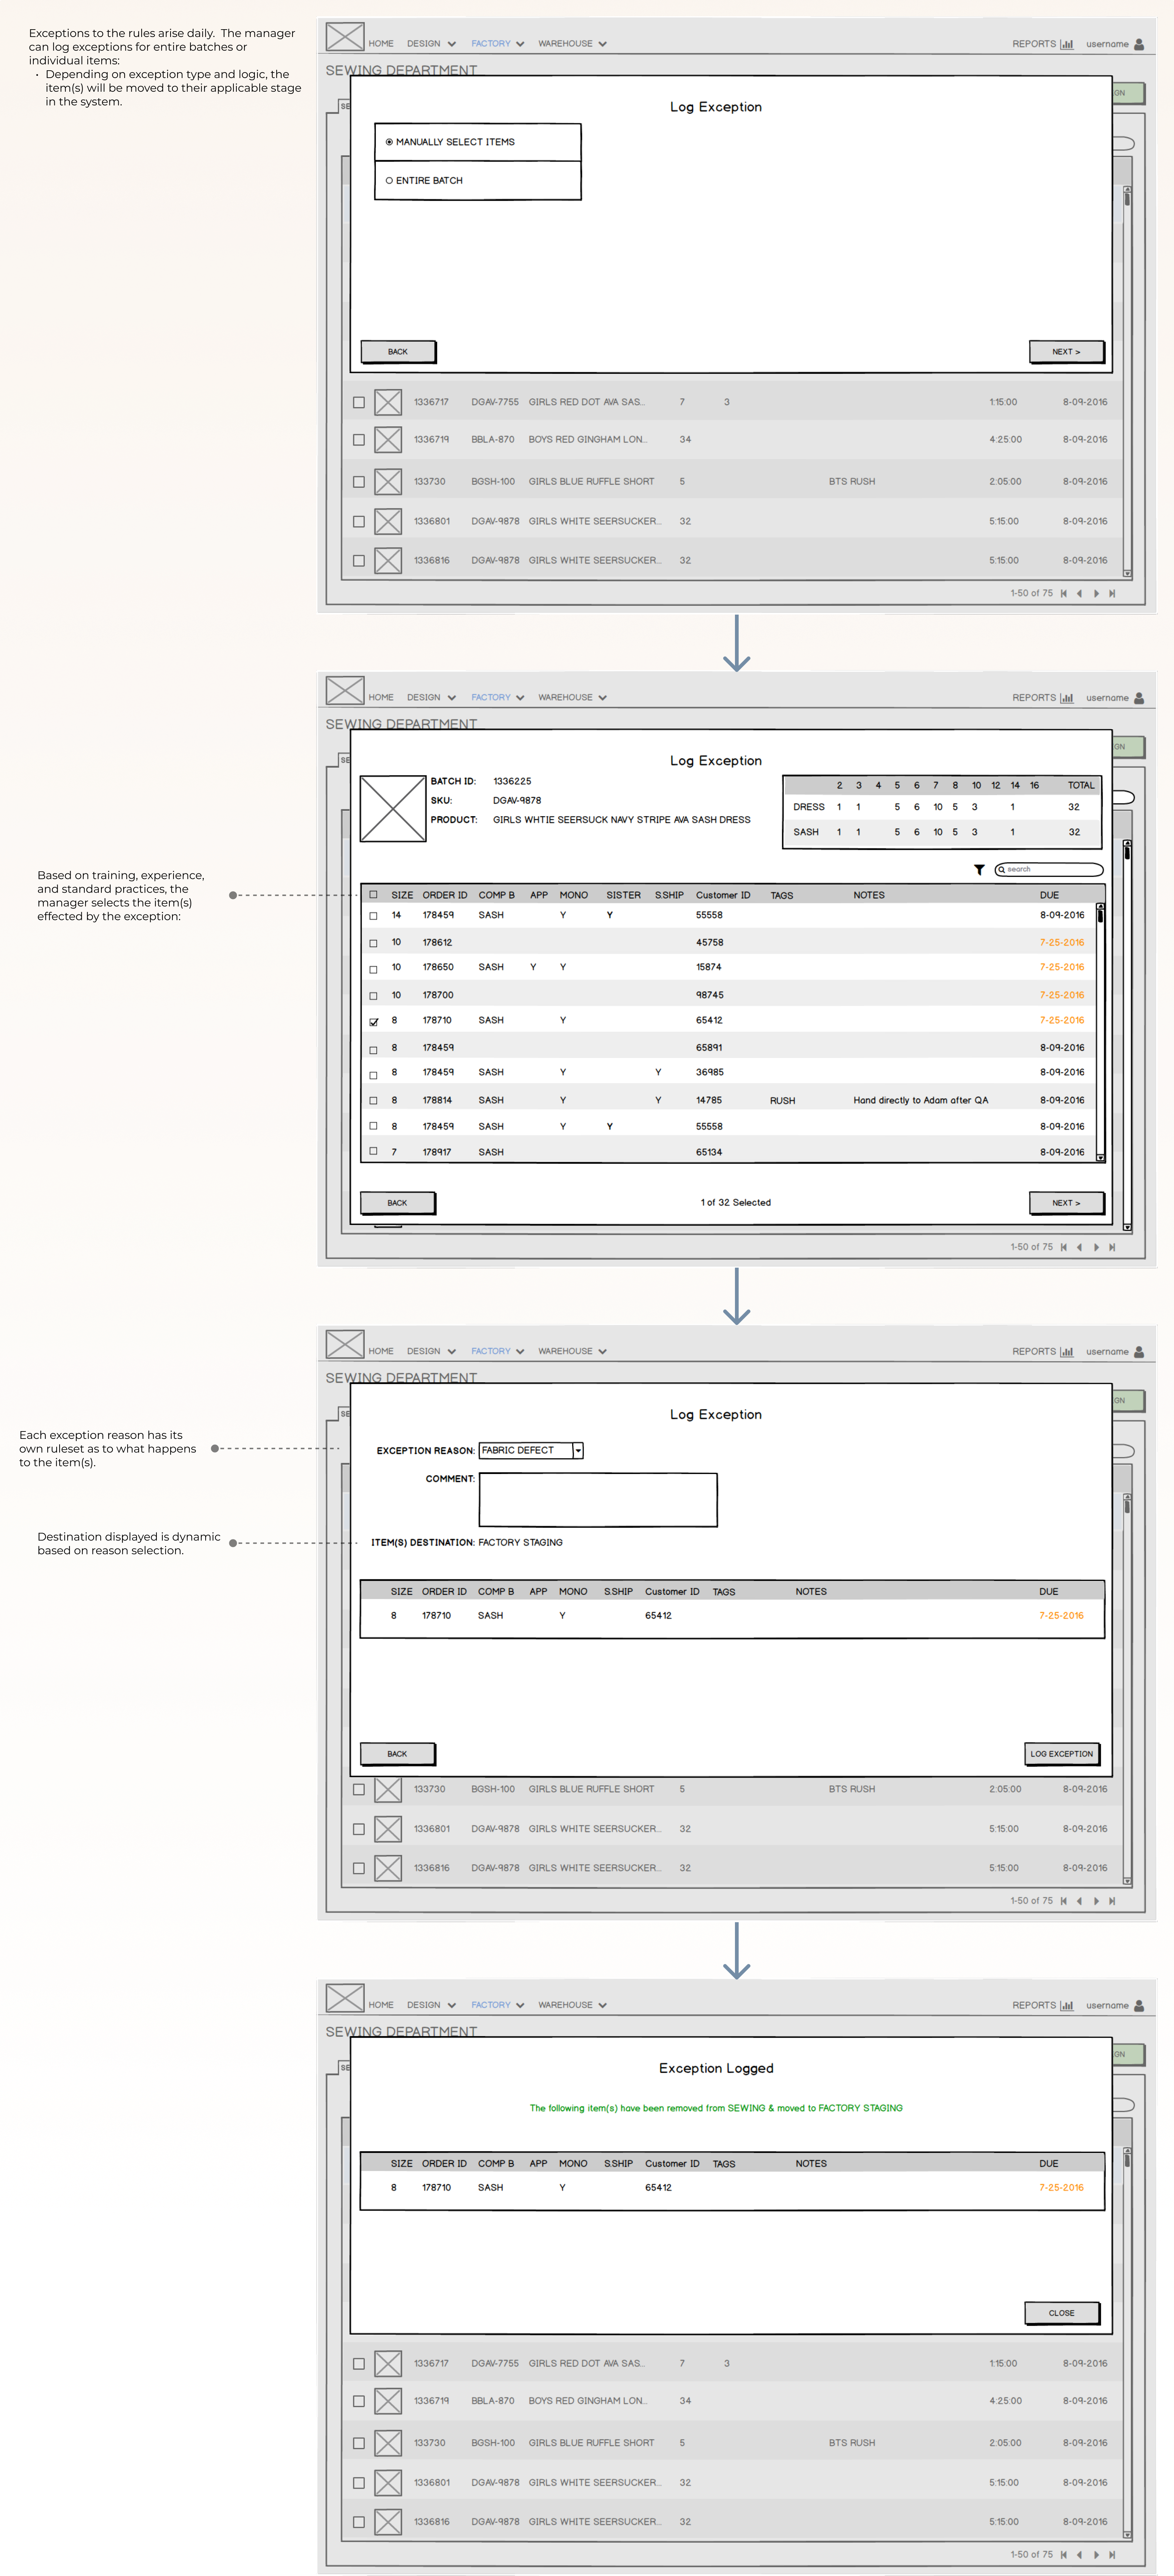 log exception wireframes